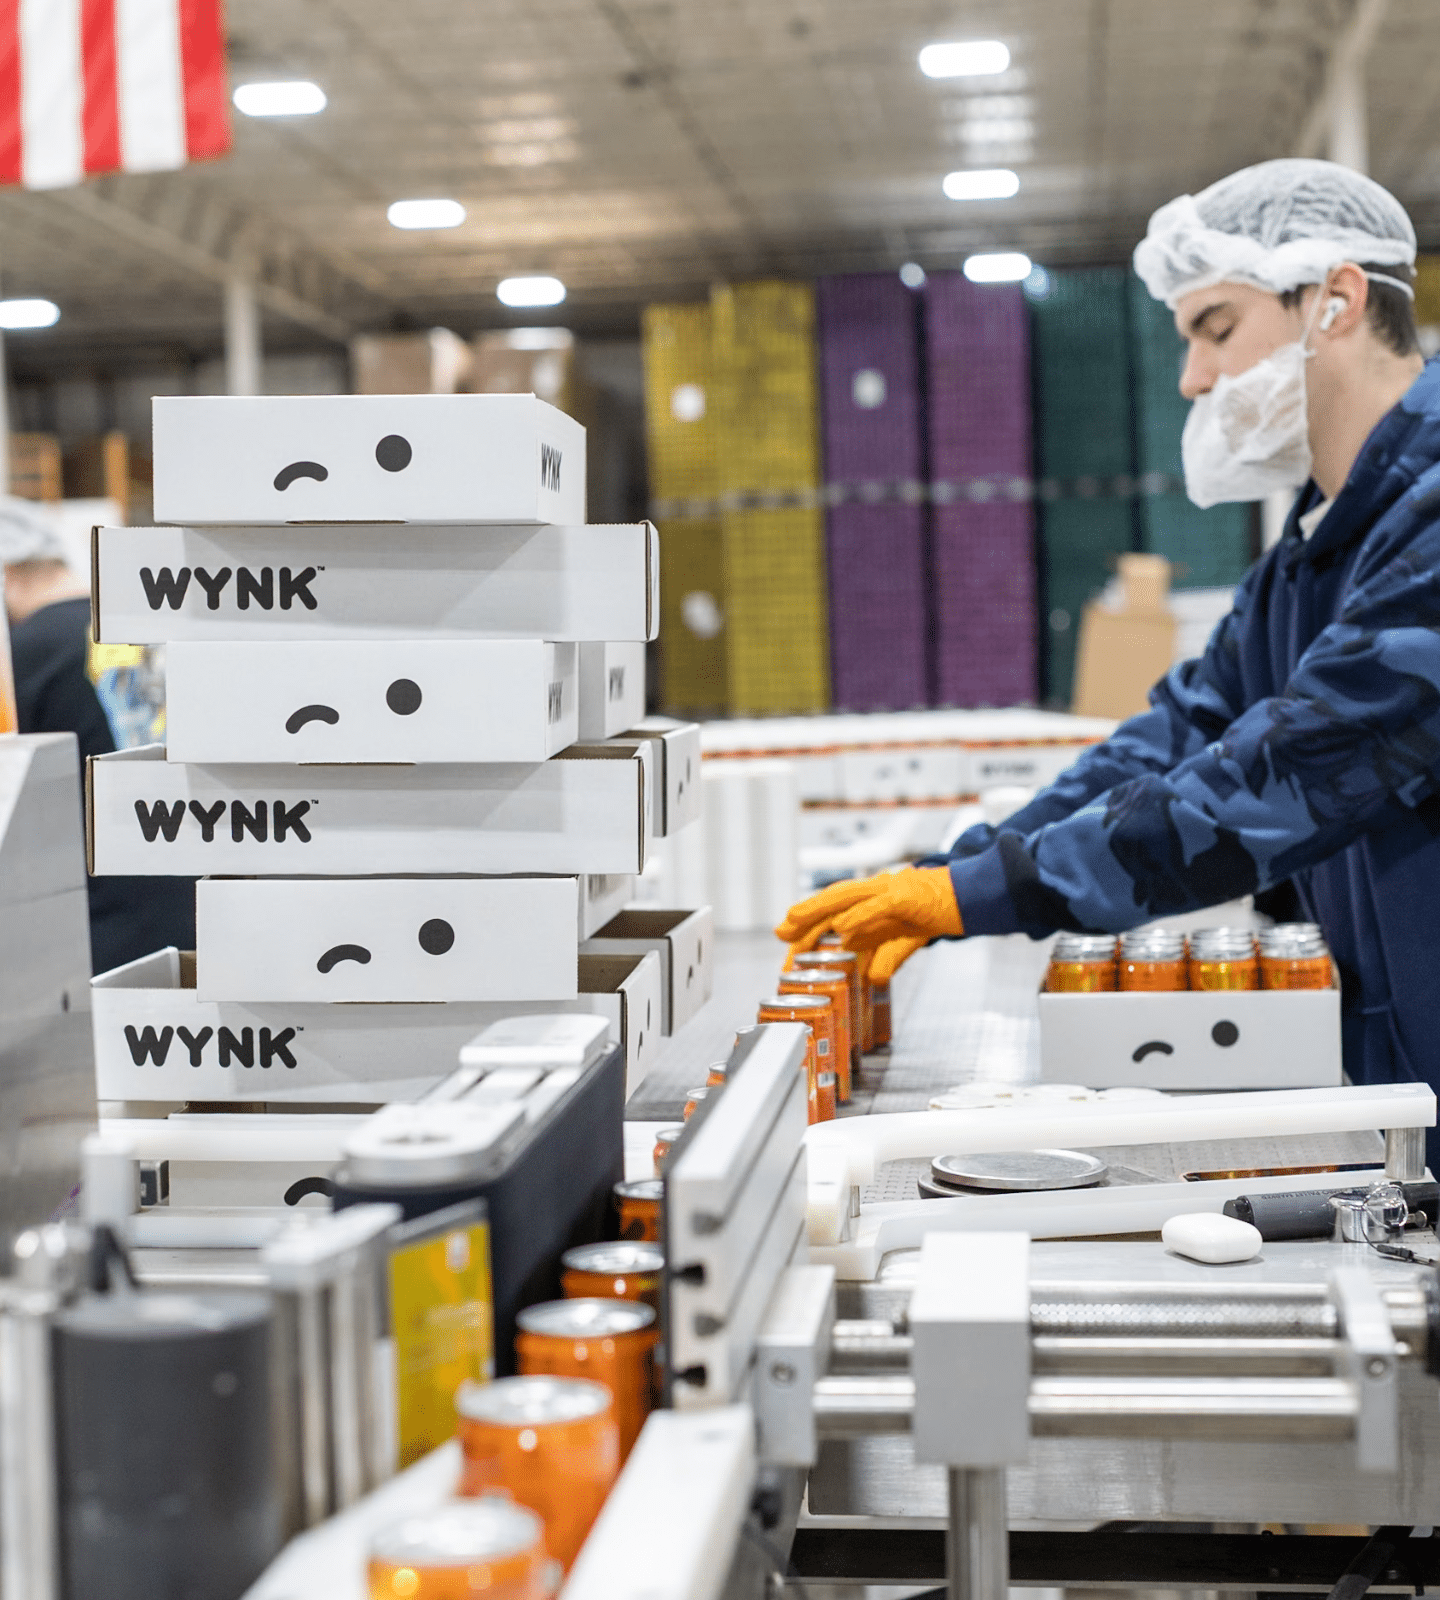 WYNK Tangerine 5mgTHC Seltzer being packaged in Wherehouse